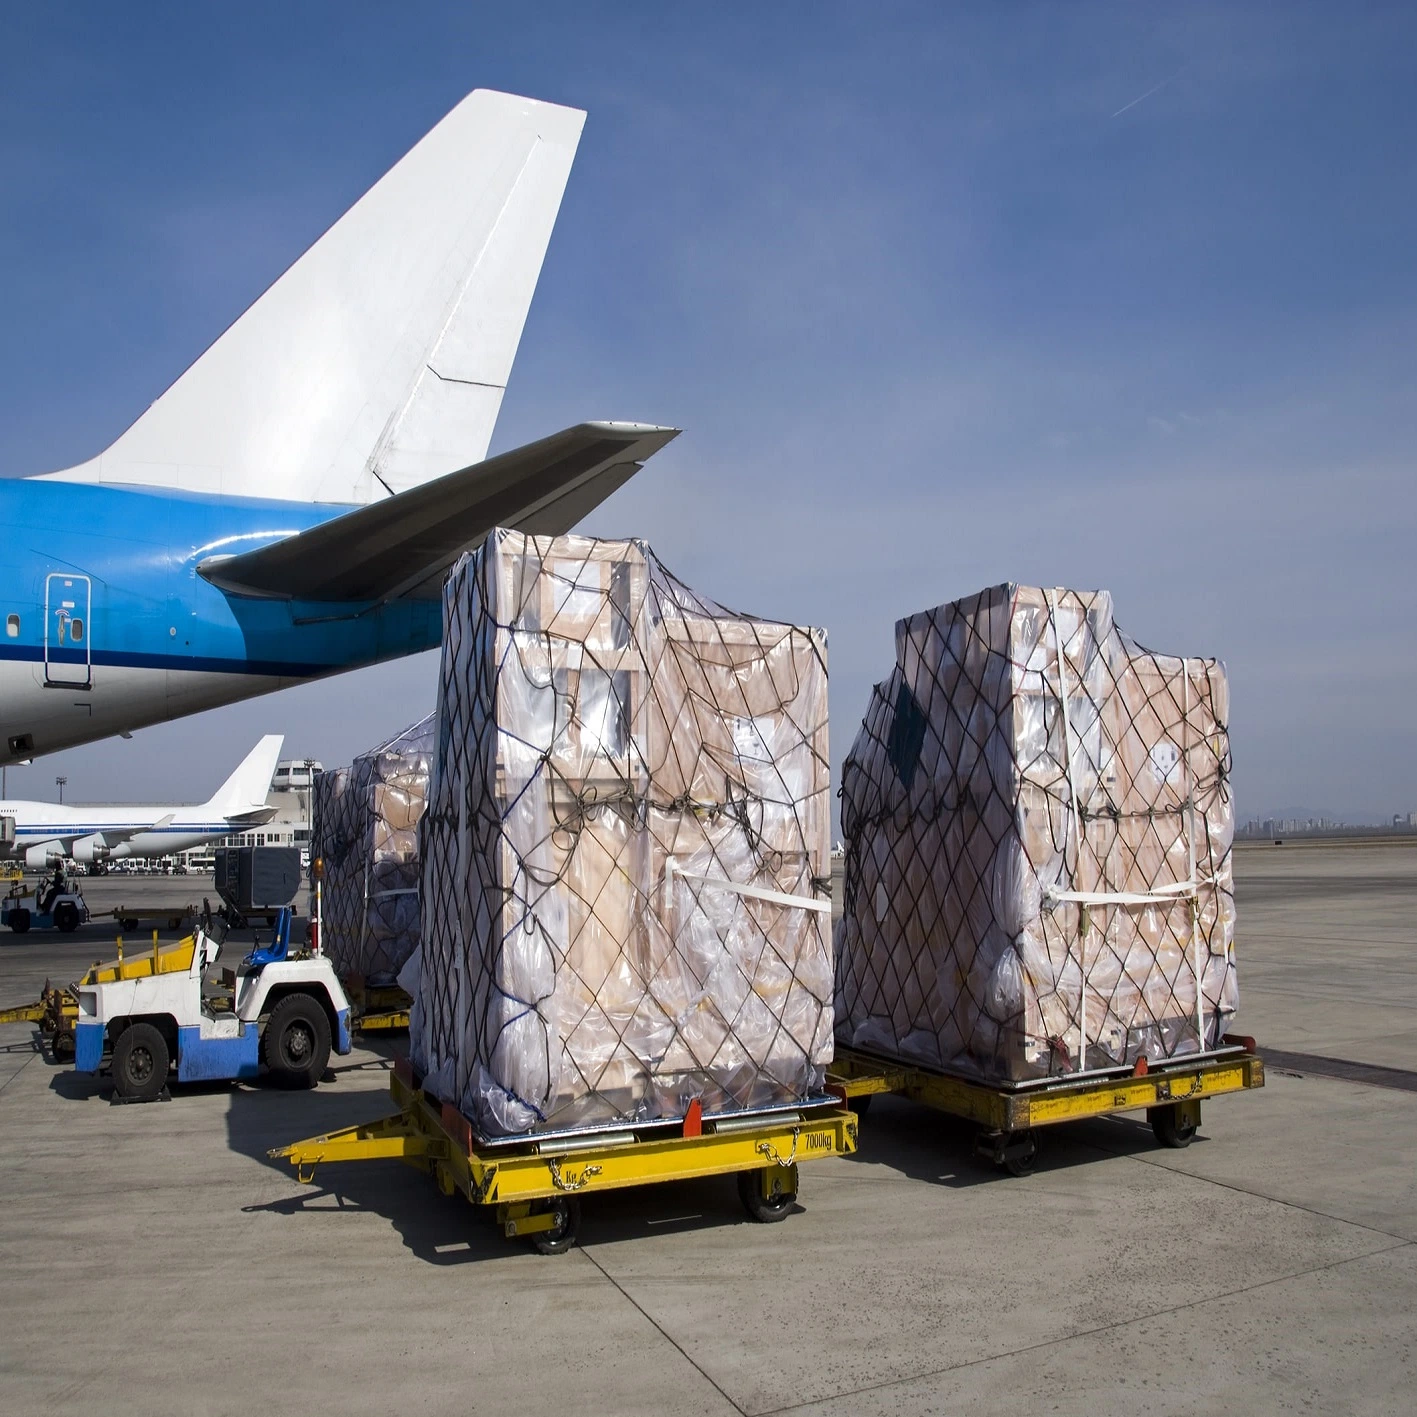 Air Freight Shipping From China to All Over of The World Fob/CIF/DDU/DDP Door to Door Delivery